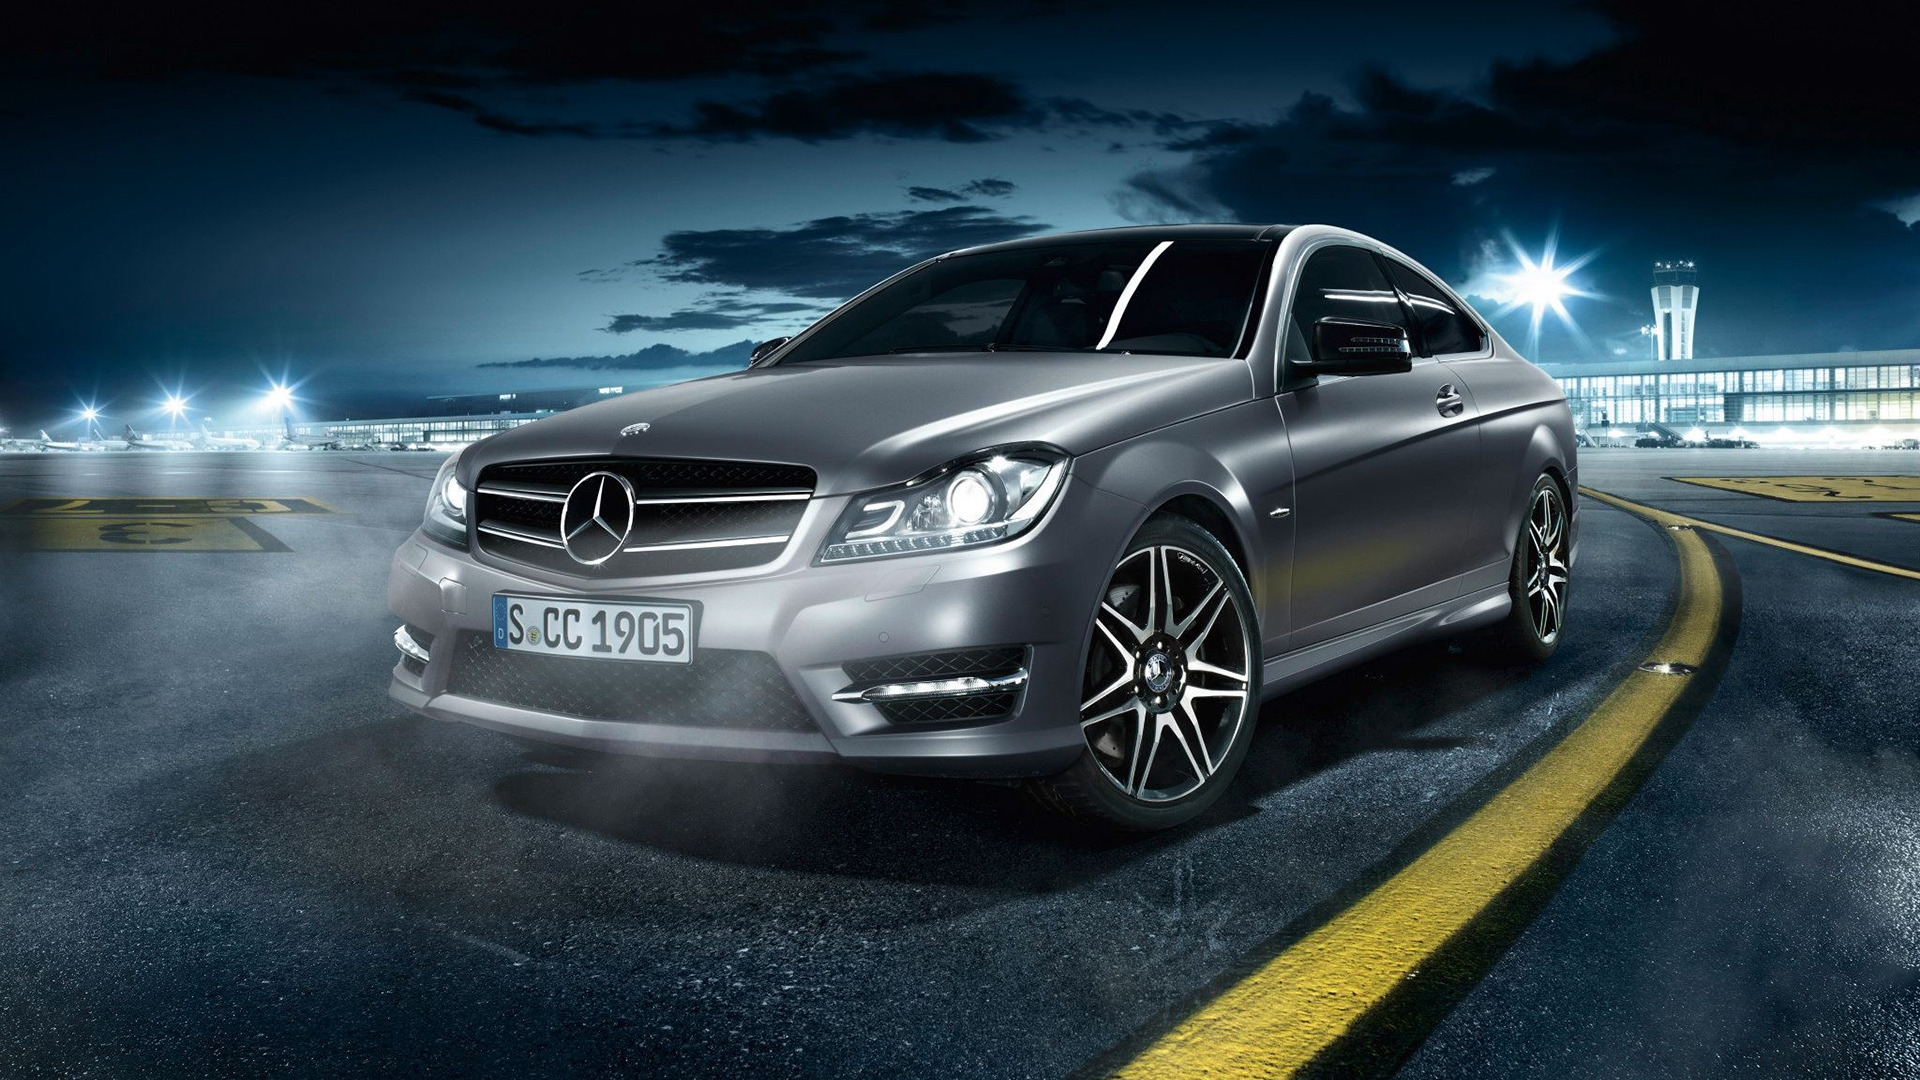 2013 Mercedes C Class AMG for 1920 x 1080 HDTV 1080p resolution